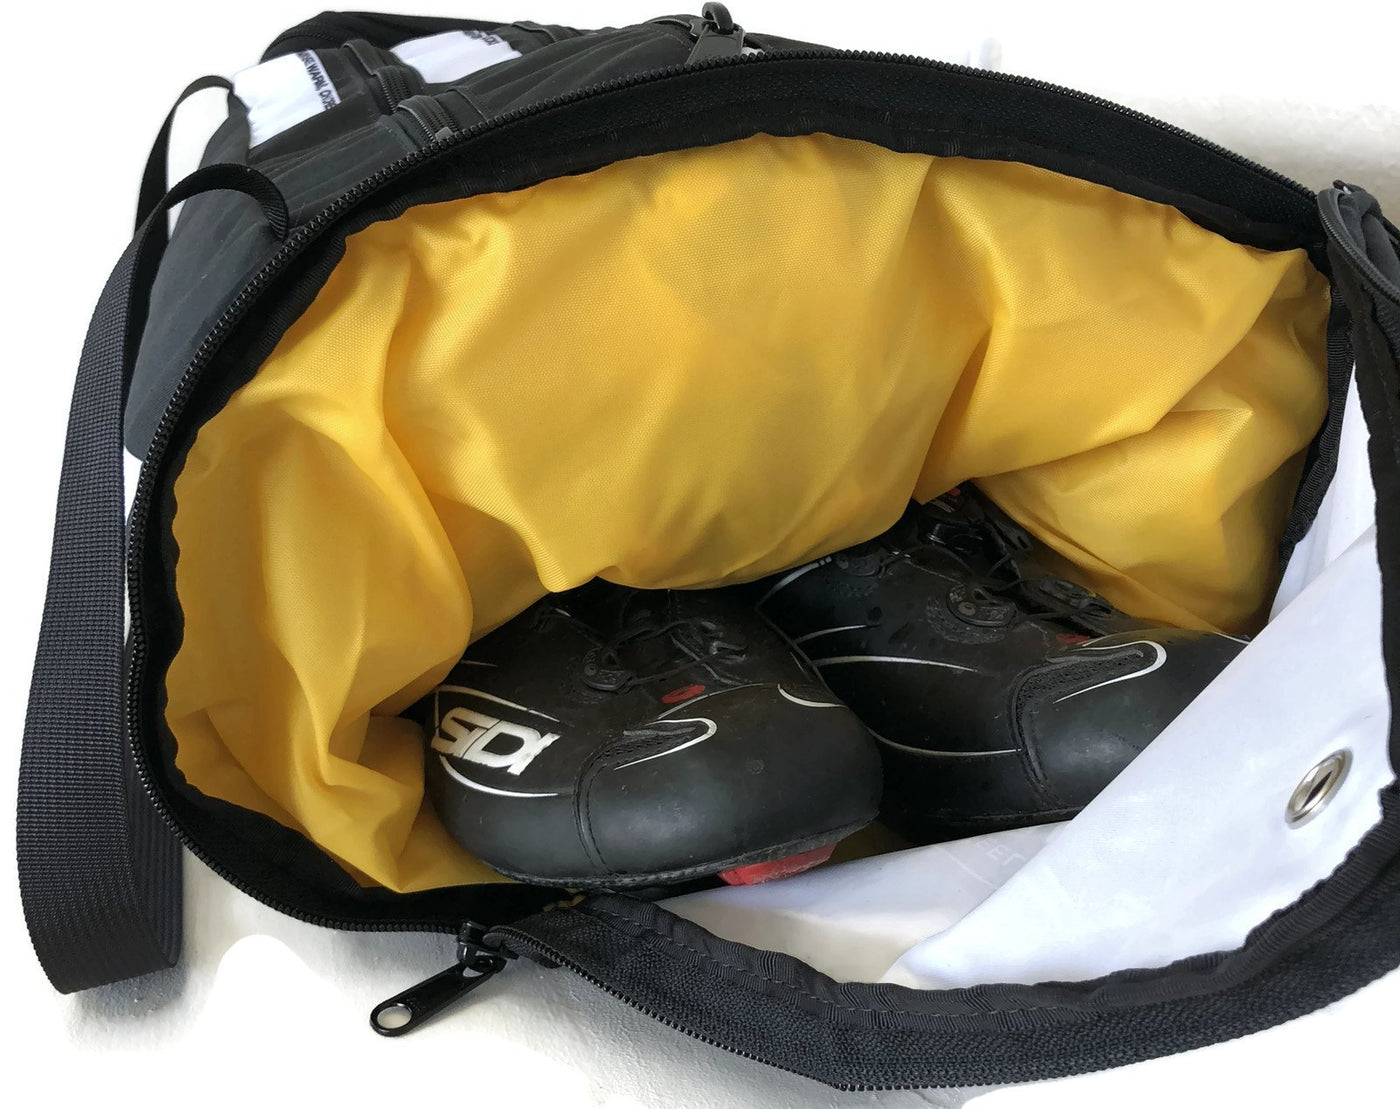 Jack Cycling RACEDAY BAG - ships in about 3 weeks